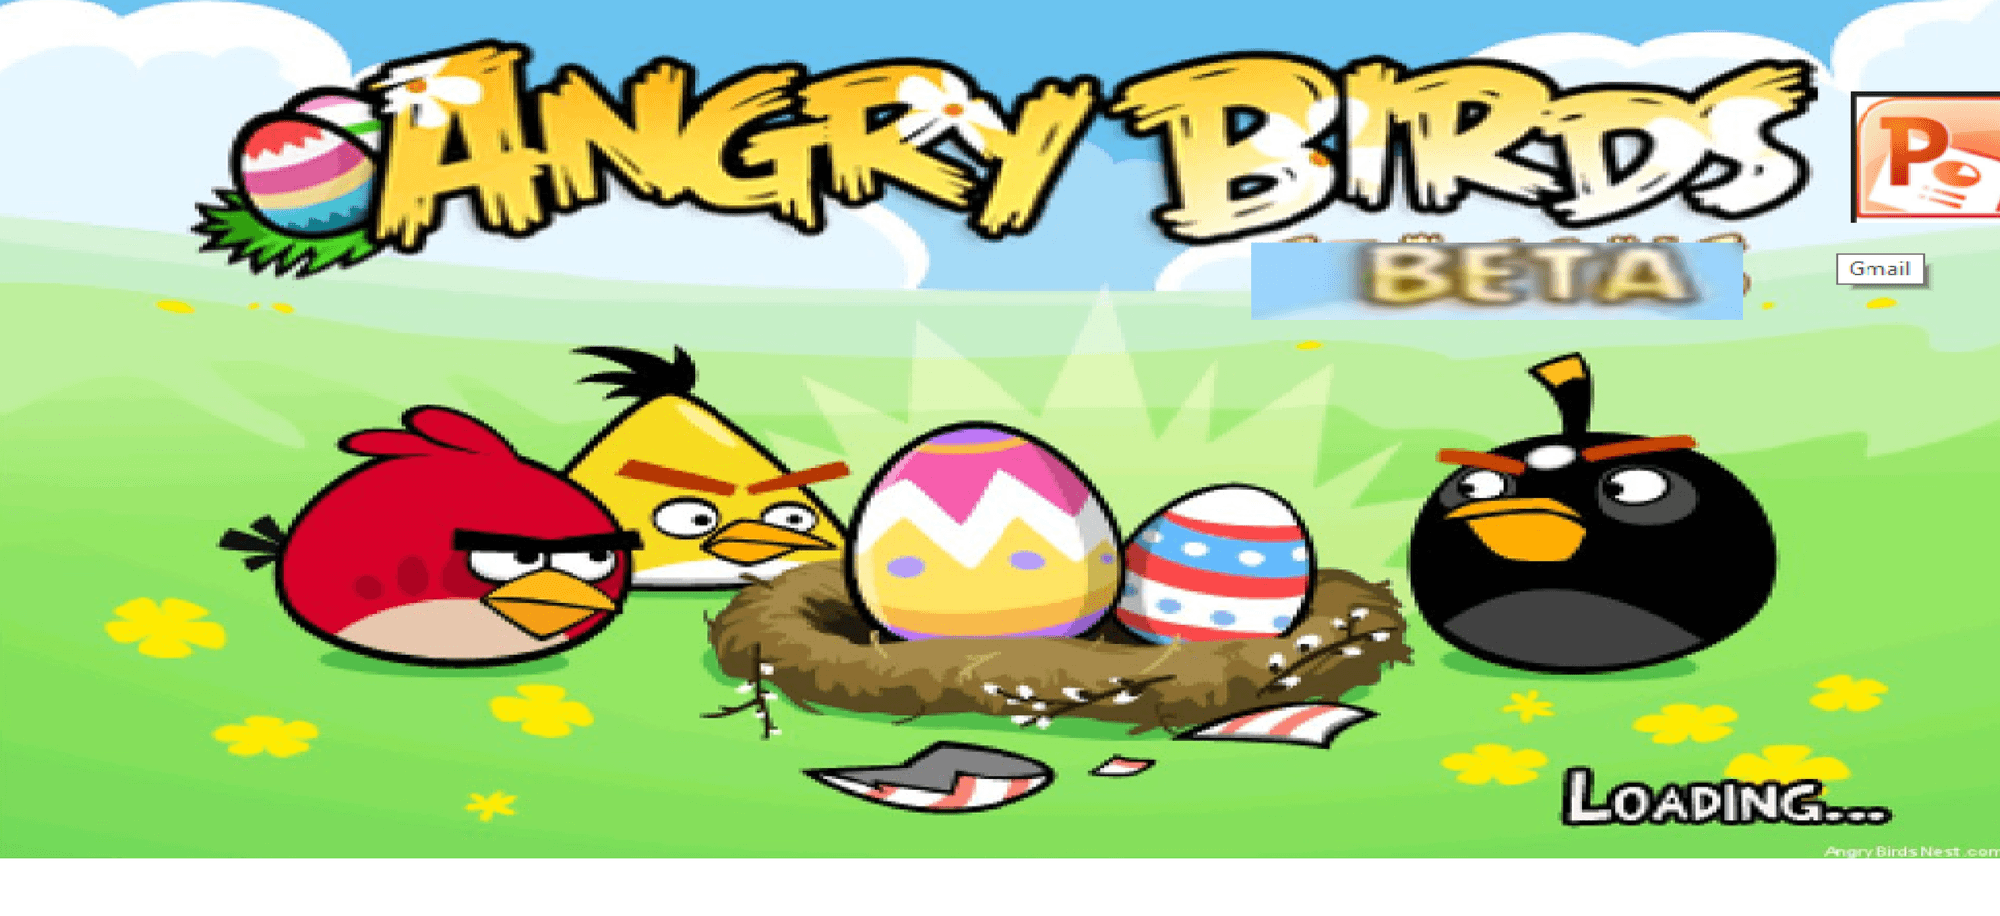 Angry Birds Loading Logo - Angry Birds Powerpoint | Angry Birds Fanon Wiki | FANDOM powered by ...